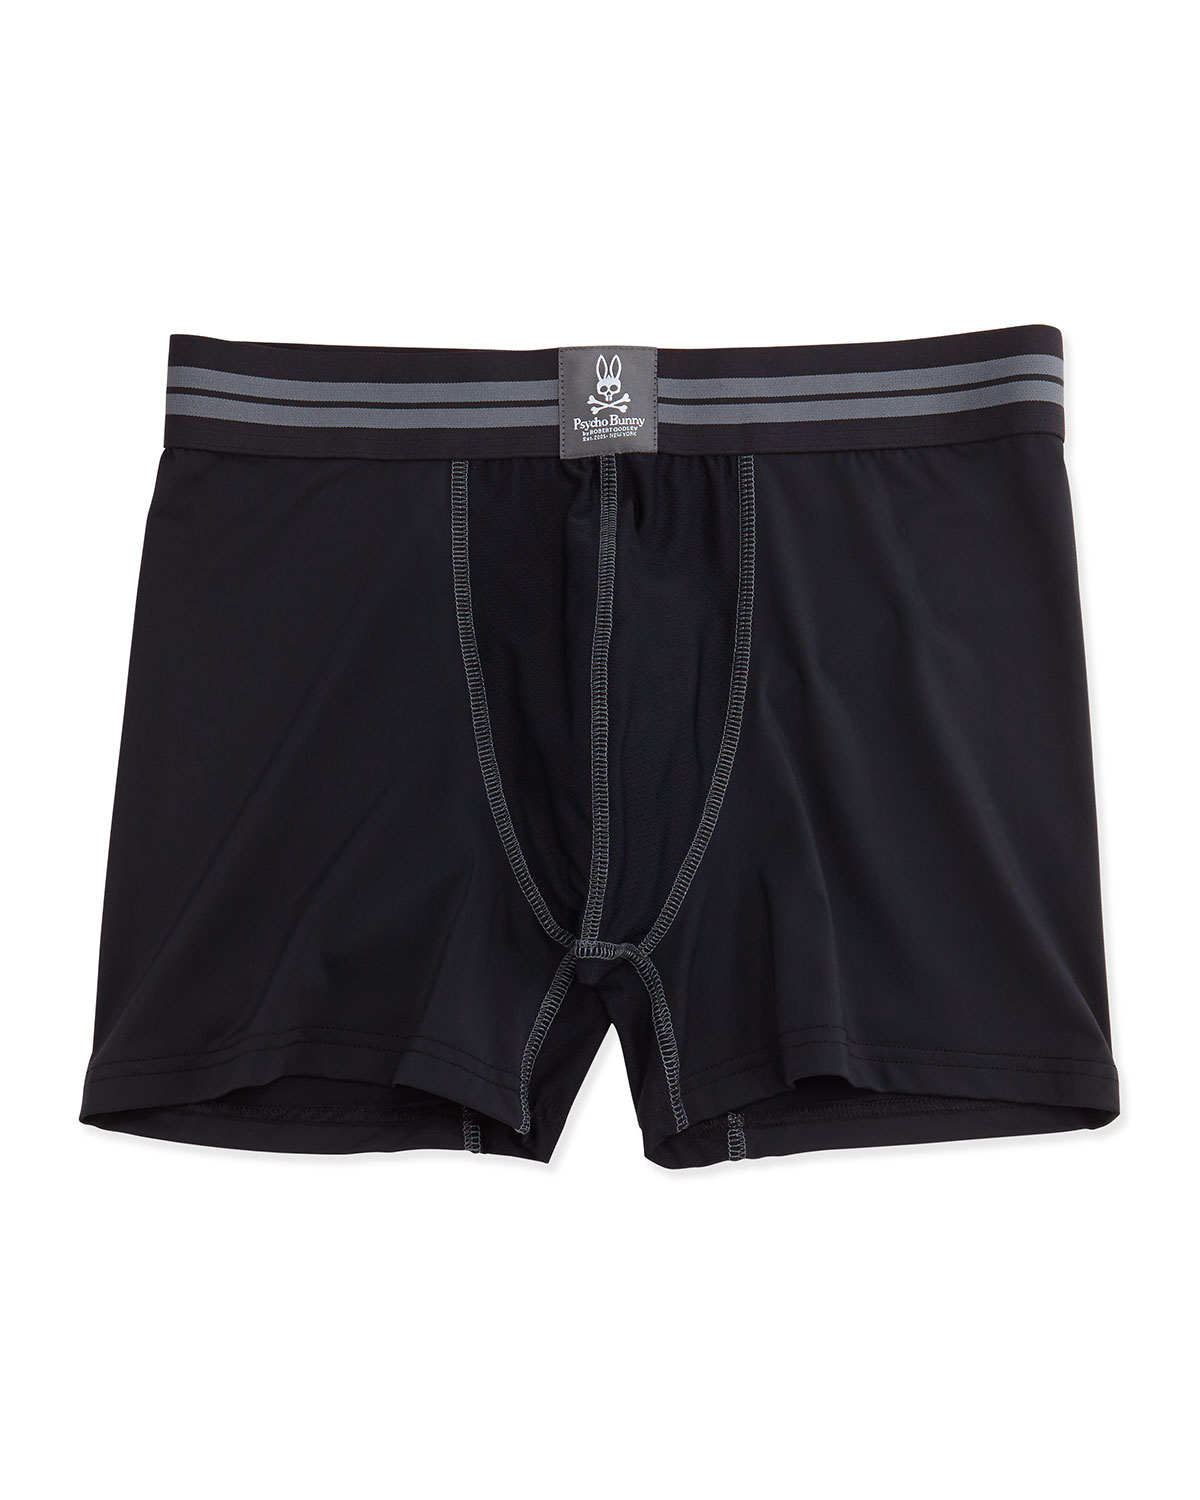 Psycho bunny Performance Boxer Briefs in Black for Men | Lyst